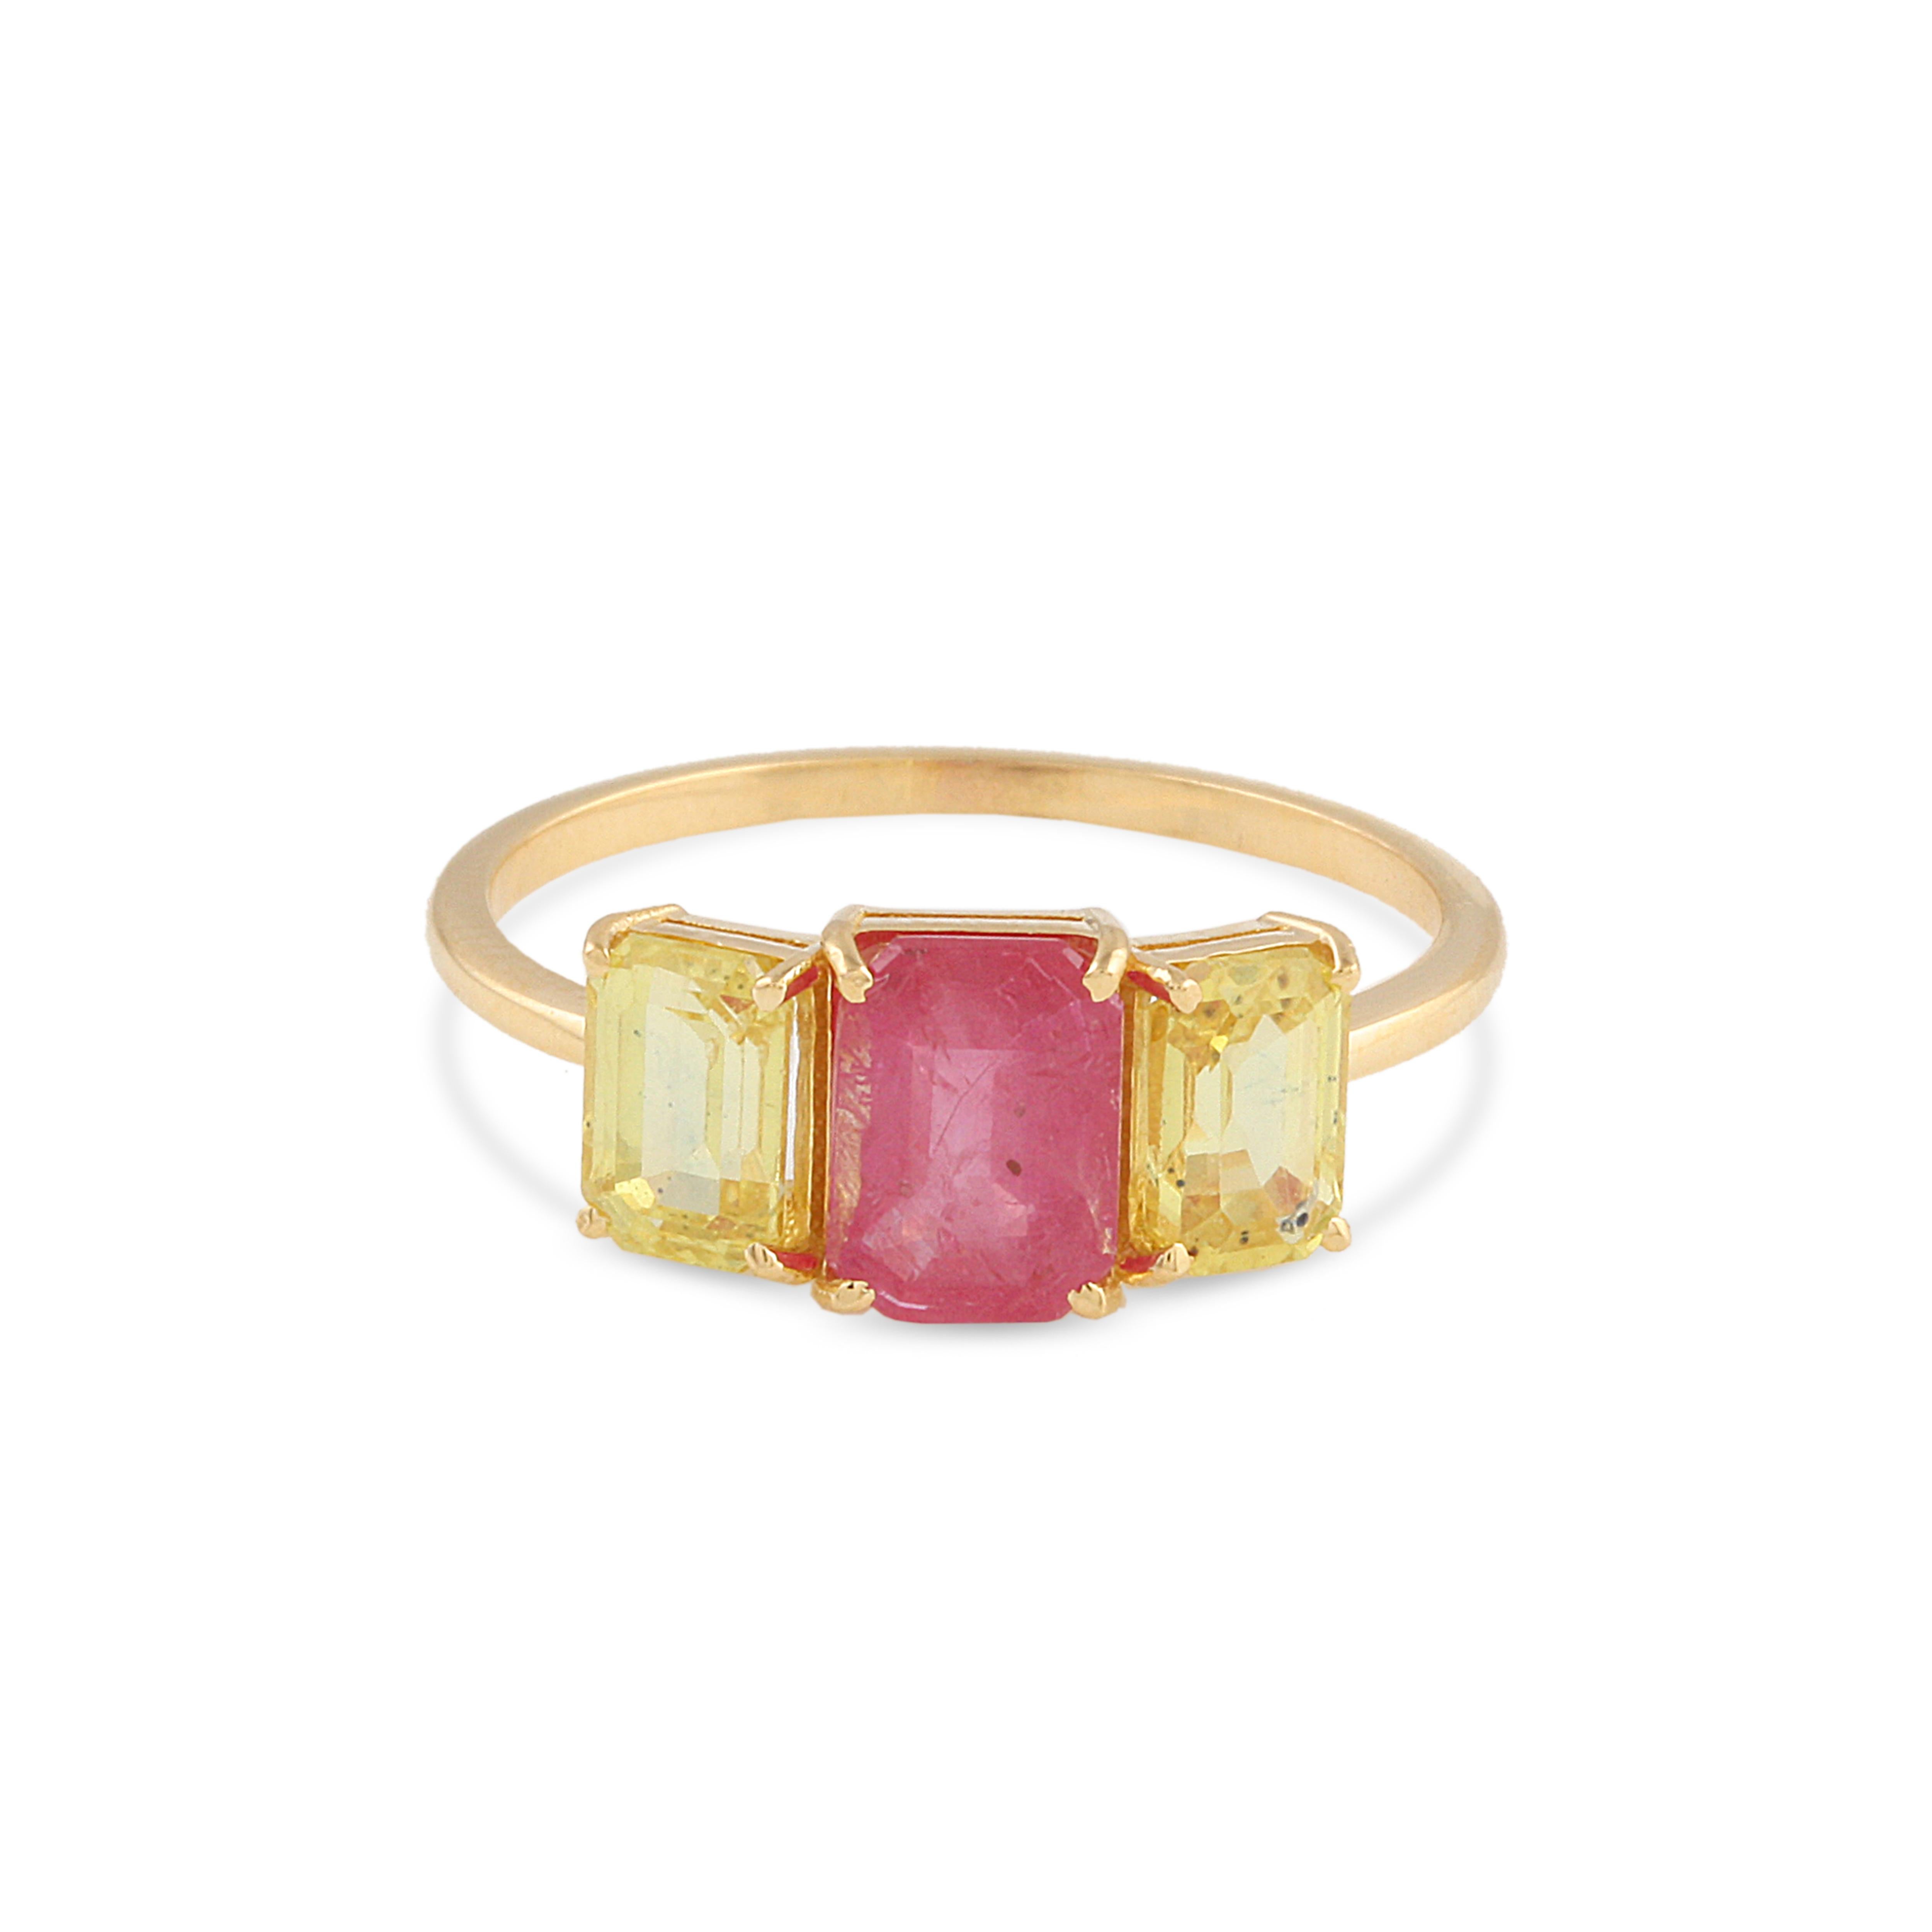 Tresor Beautiful Ring feature 2.45 carats of Gemstone. The Ring are an ode to the luxurious yet classic beauty with sparkly gemstones and feminine hues. Their contemporary and modern design make them perfect and versatile to be worn at any occasion. 